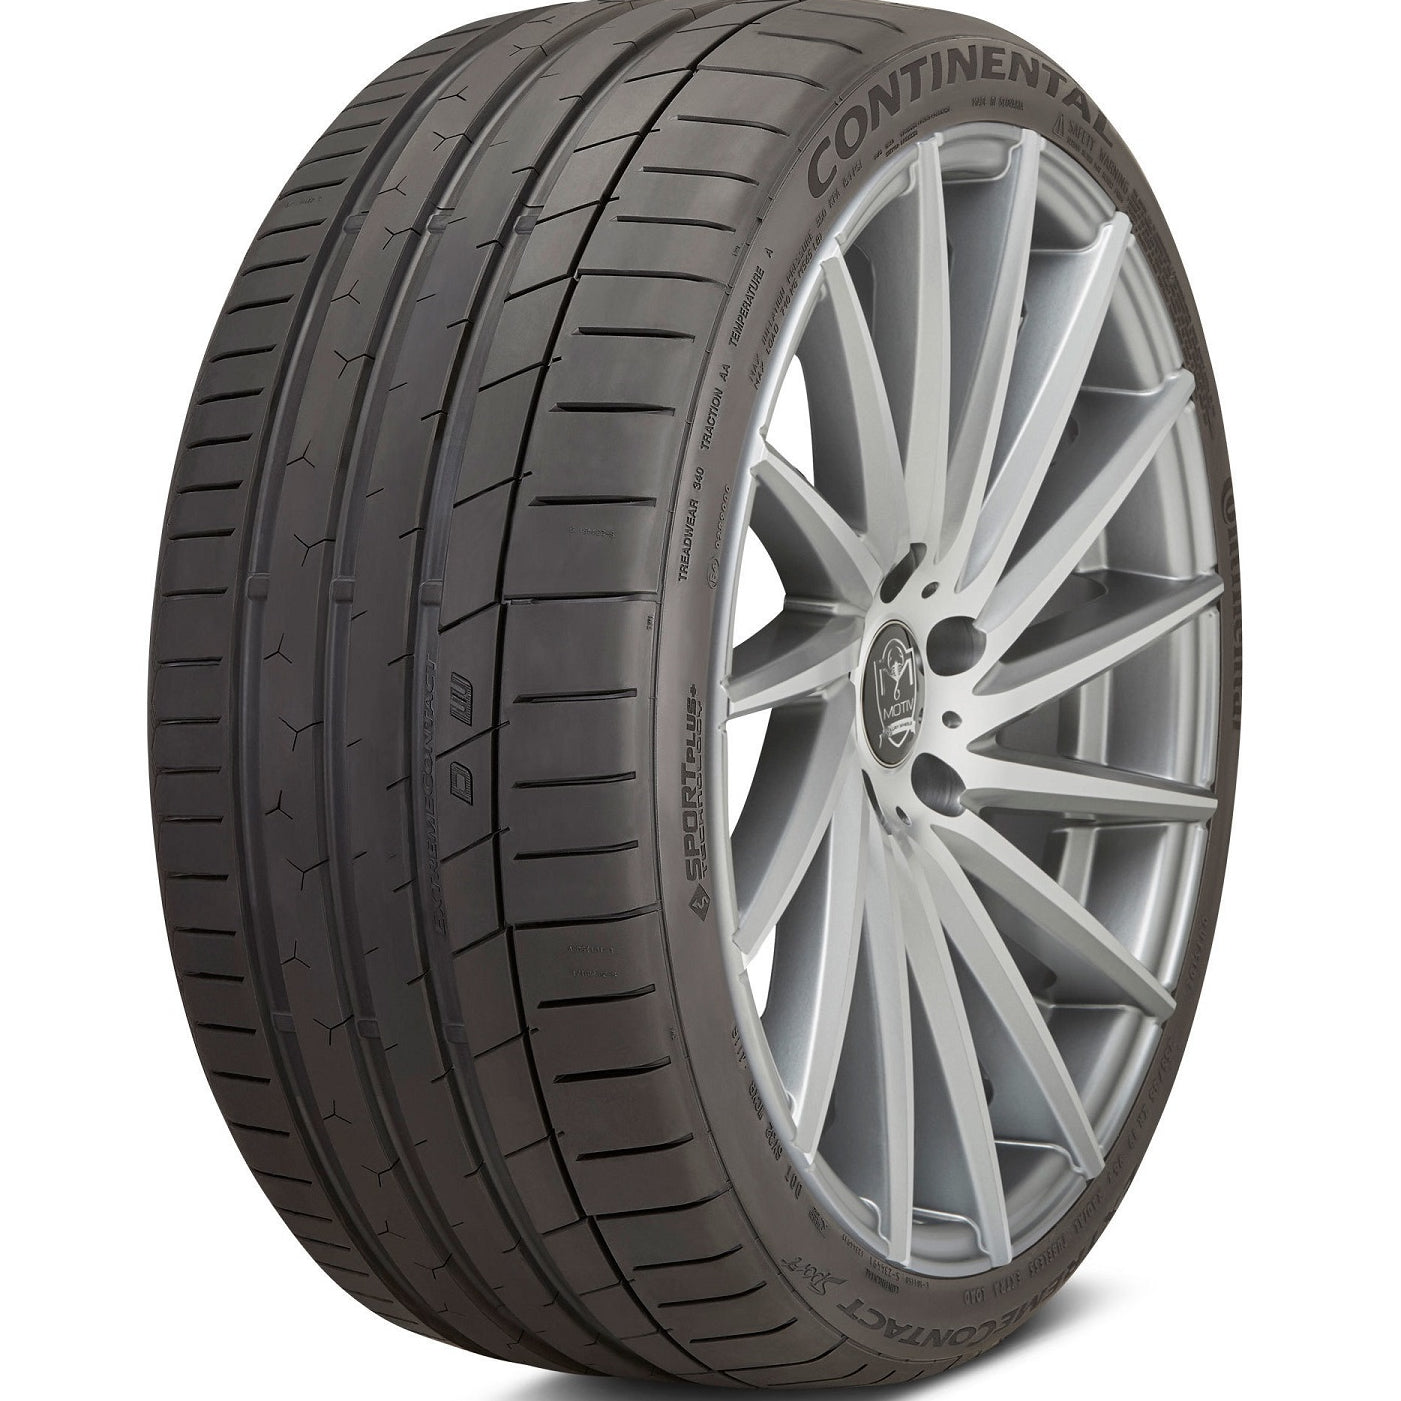 CONTINENTAL EXTREMECONTACT SPORT 265/35ZR19 (26.3X10.4R 19) Tires